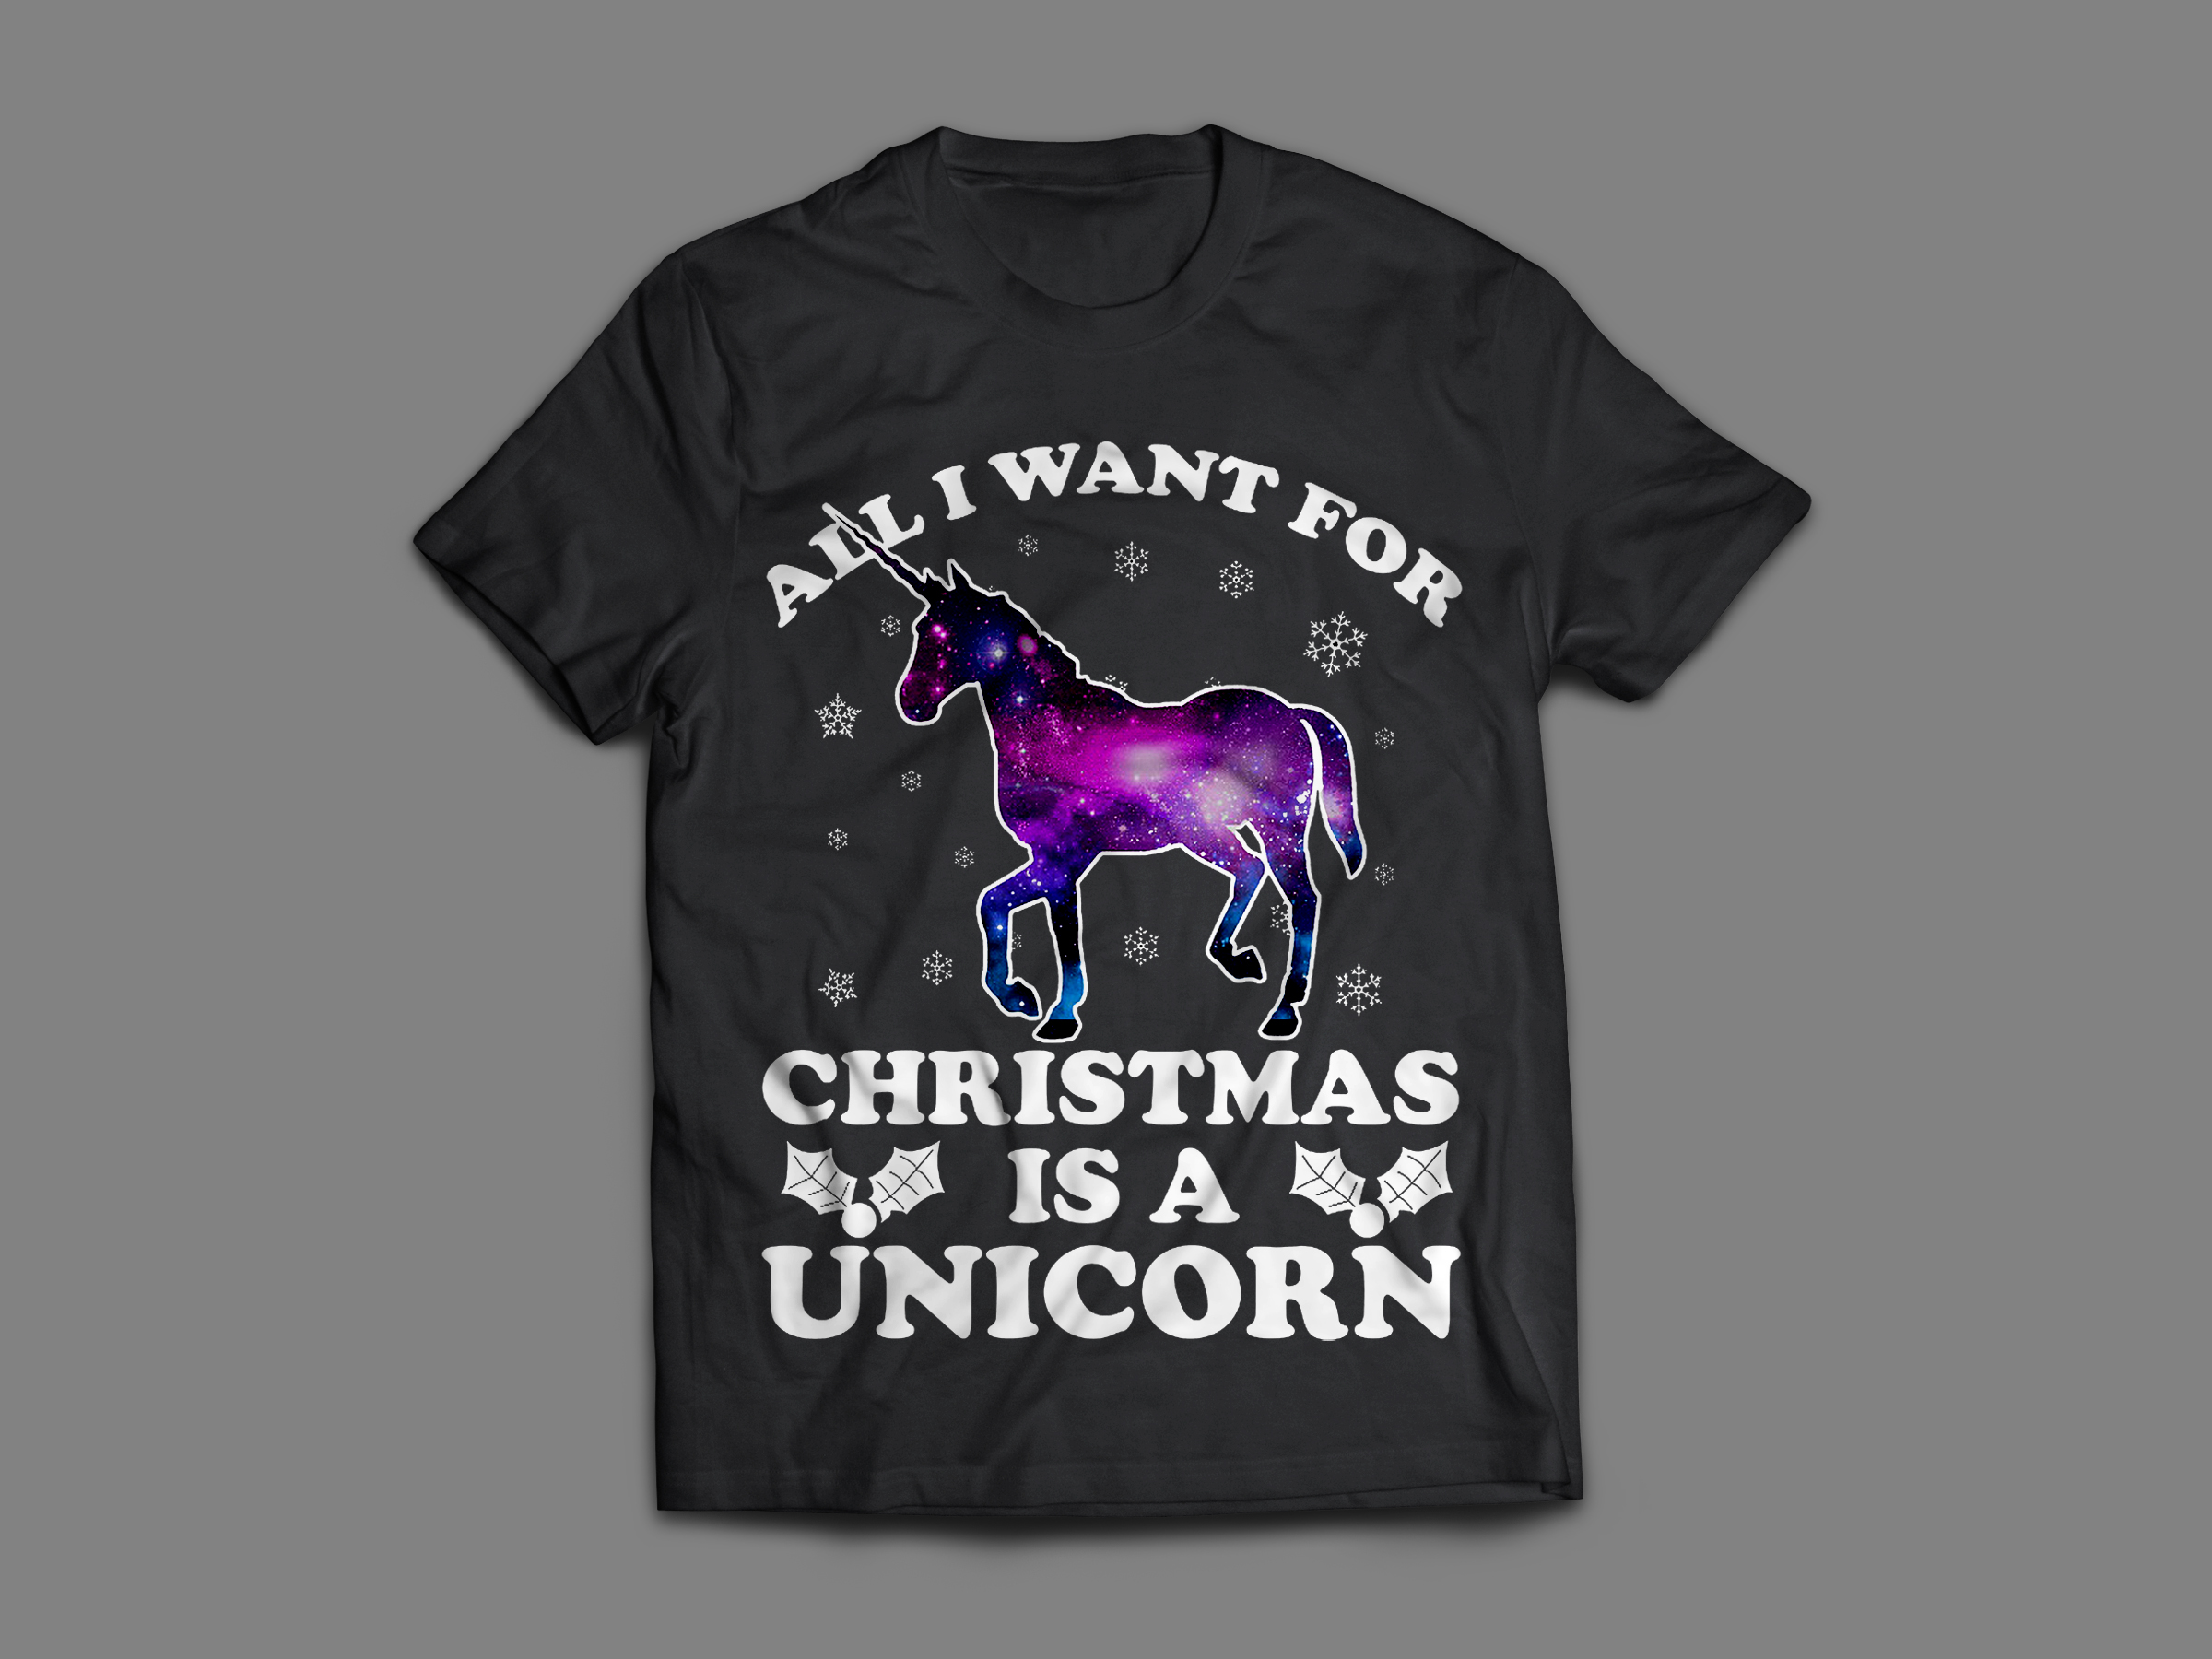 All I Want For Christmas Is A Unicorn